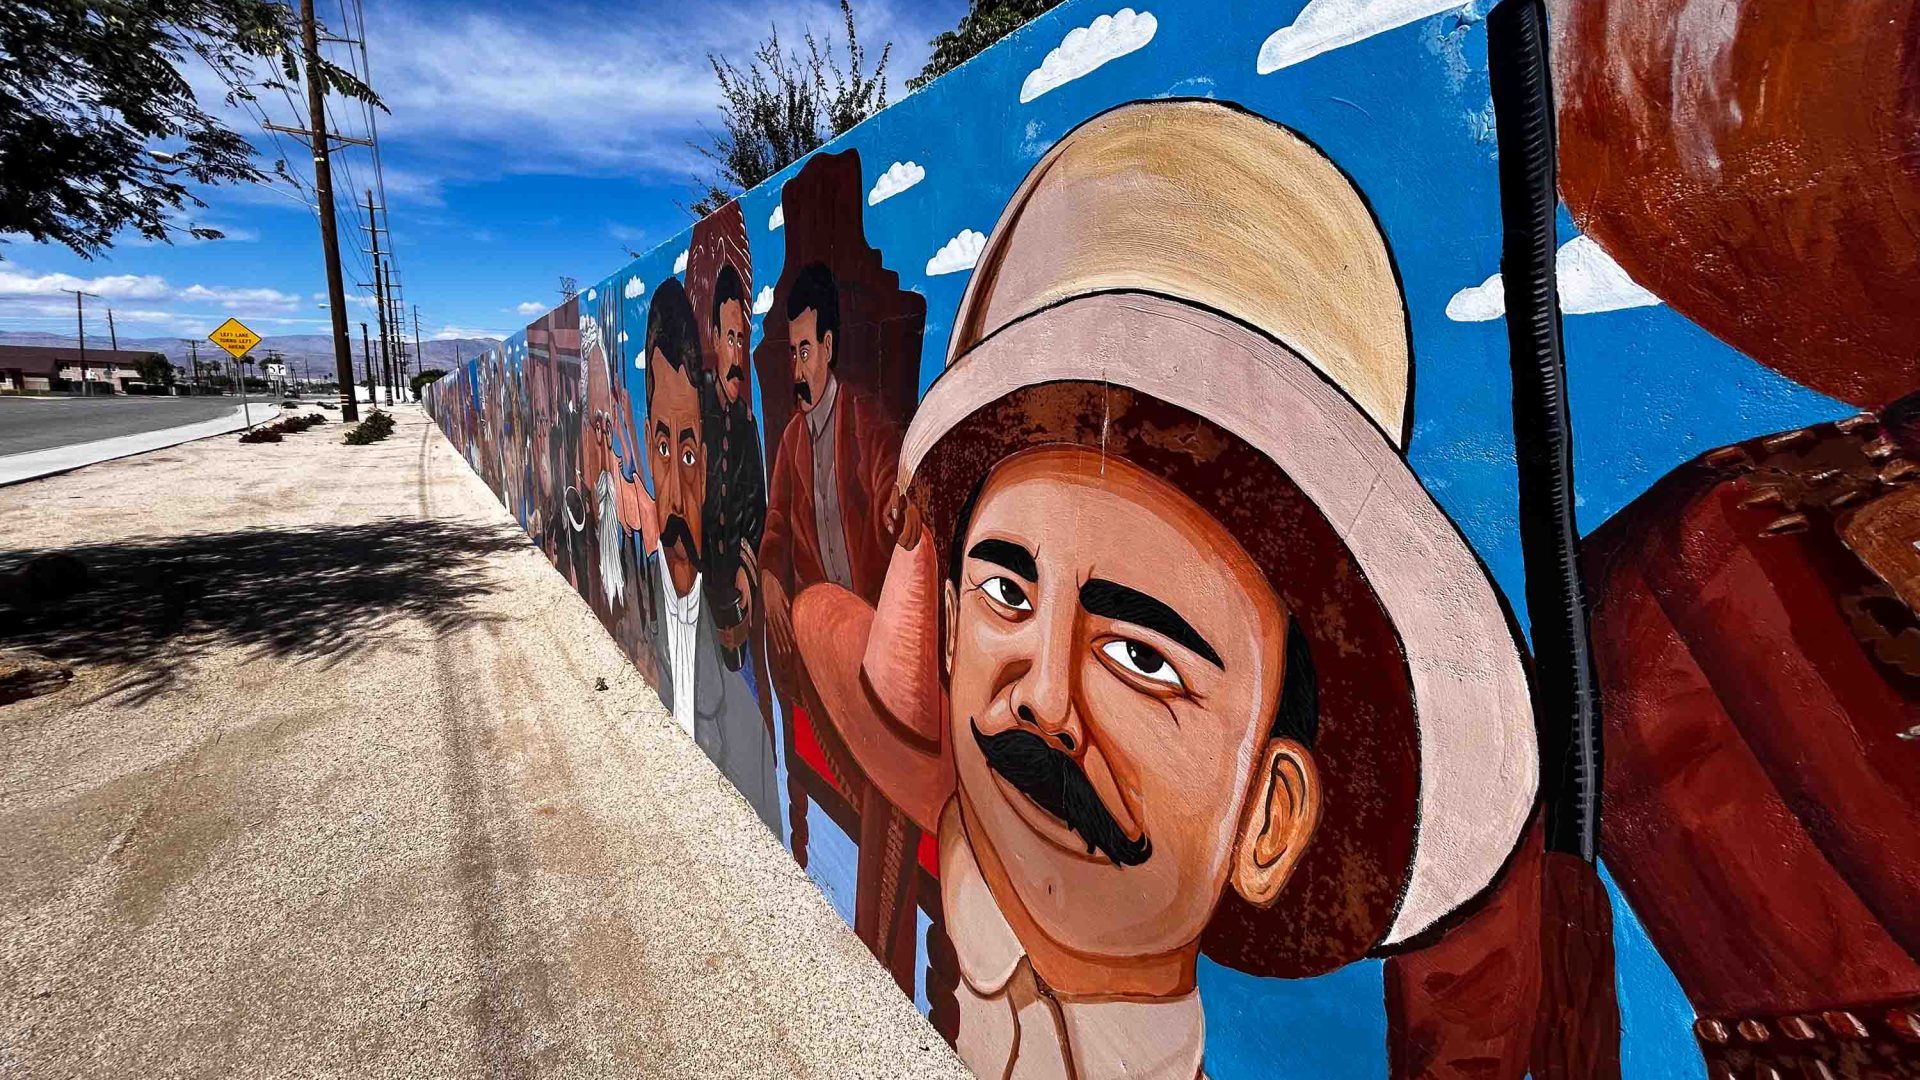 A long mural stretches along the street.